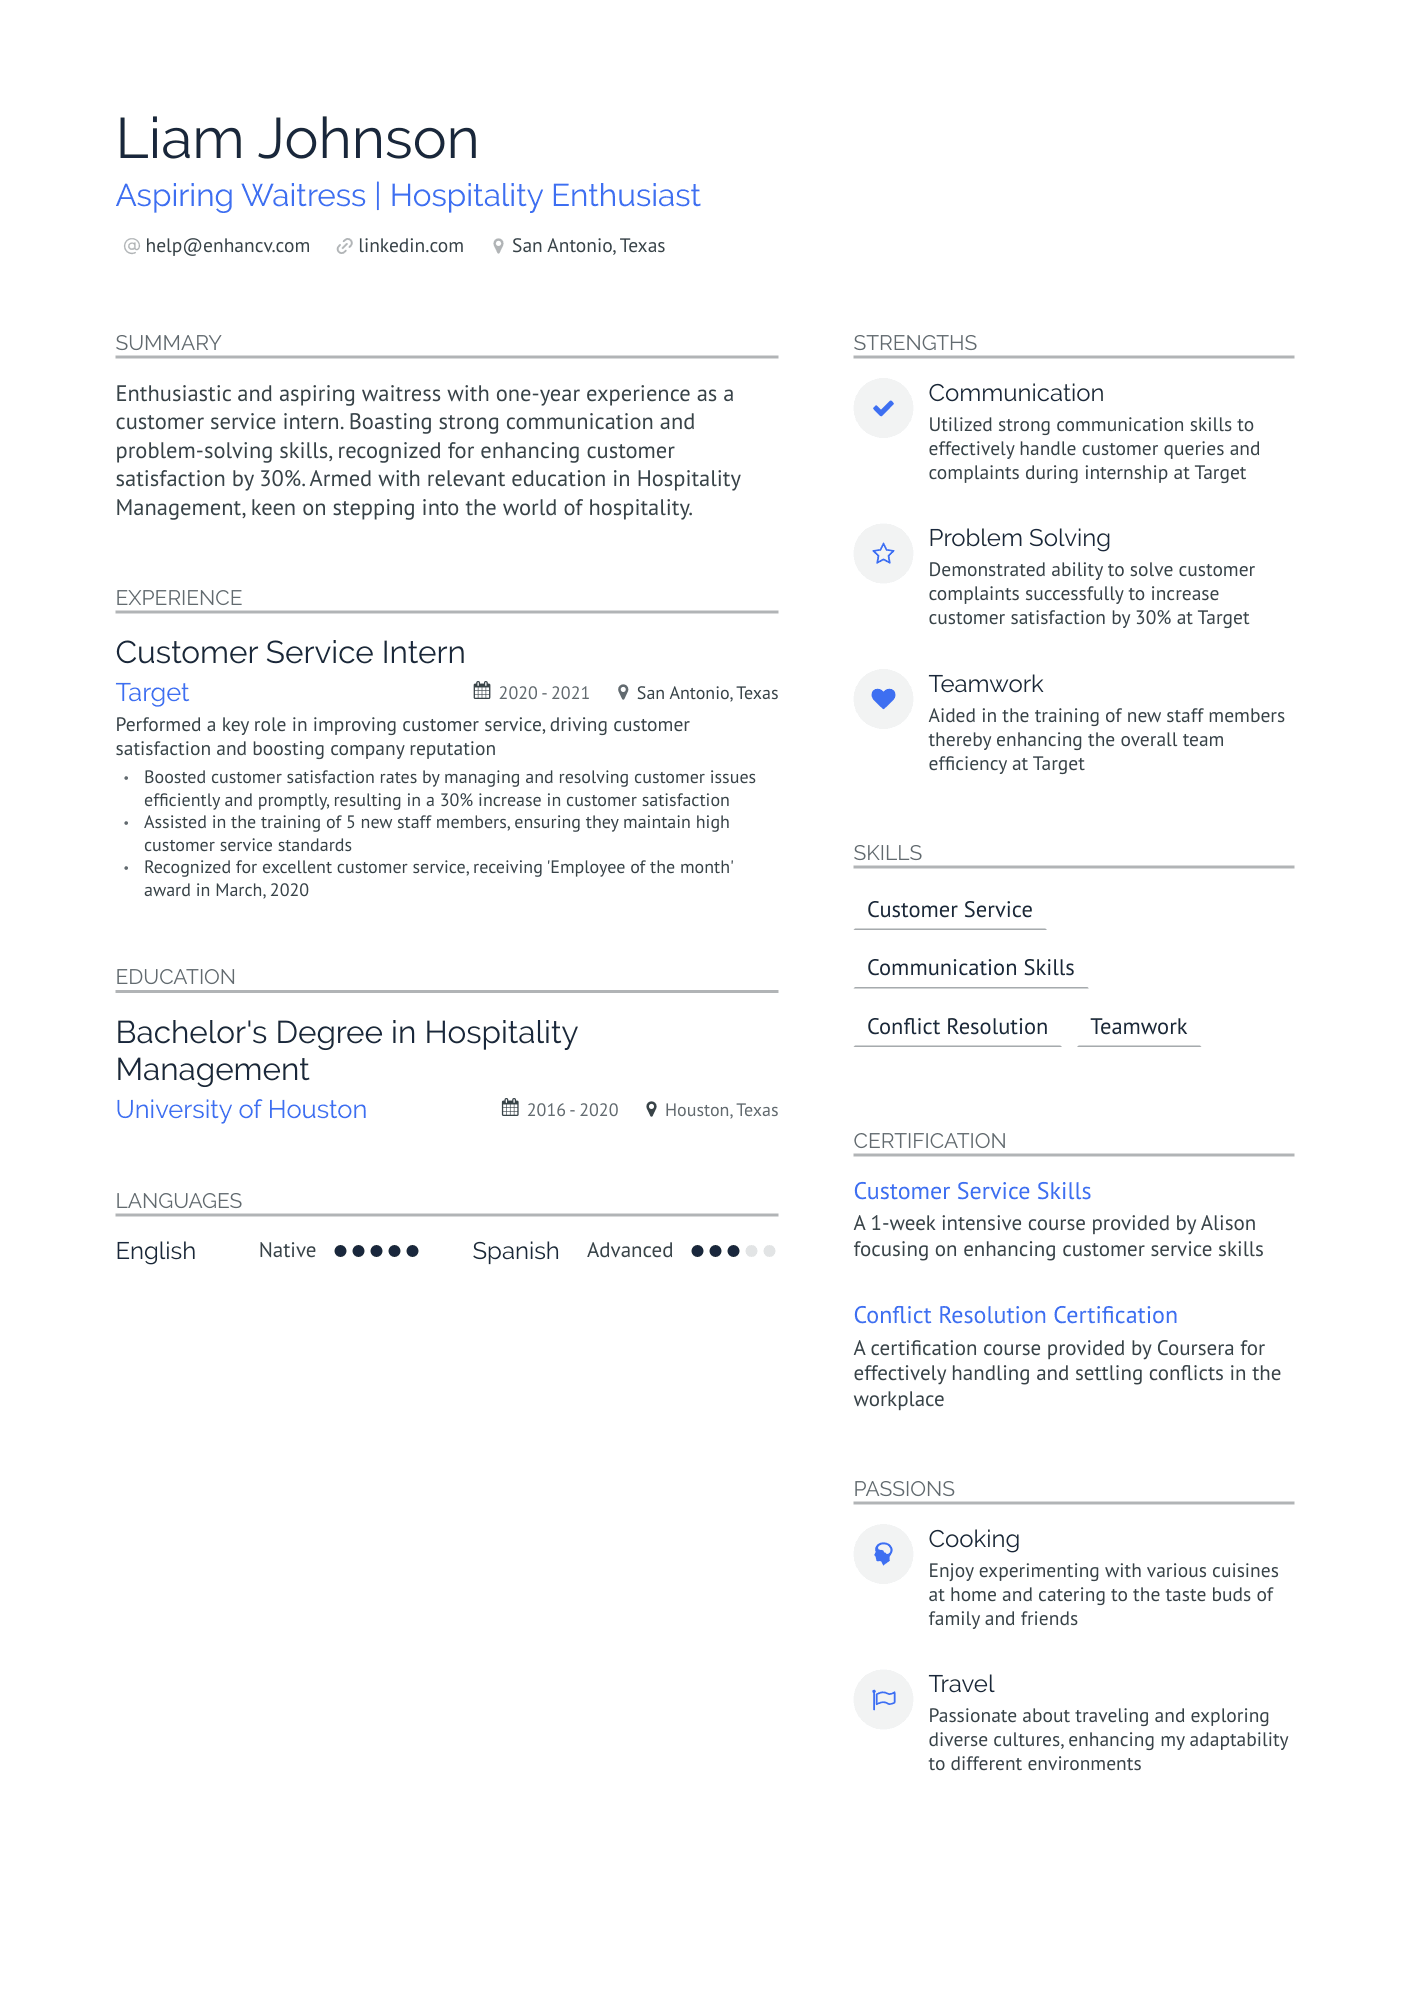 sample resume for waitress with experience